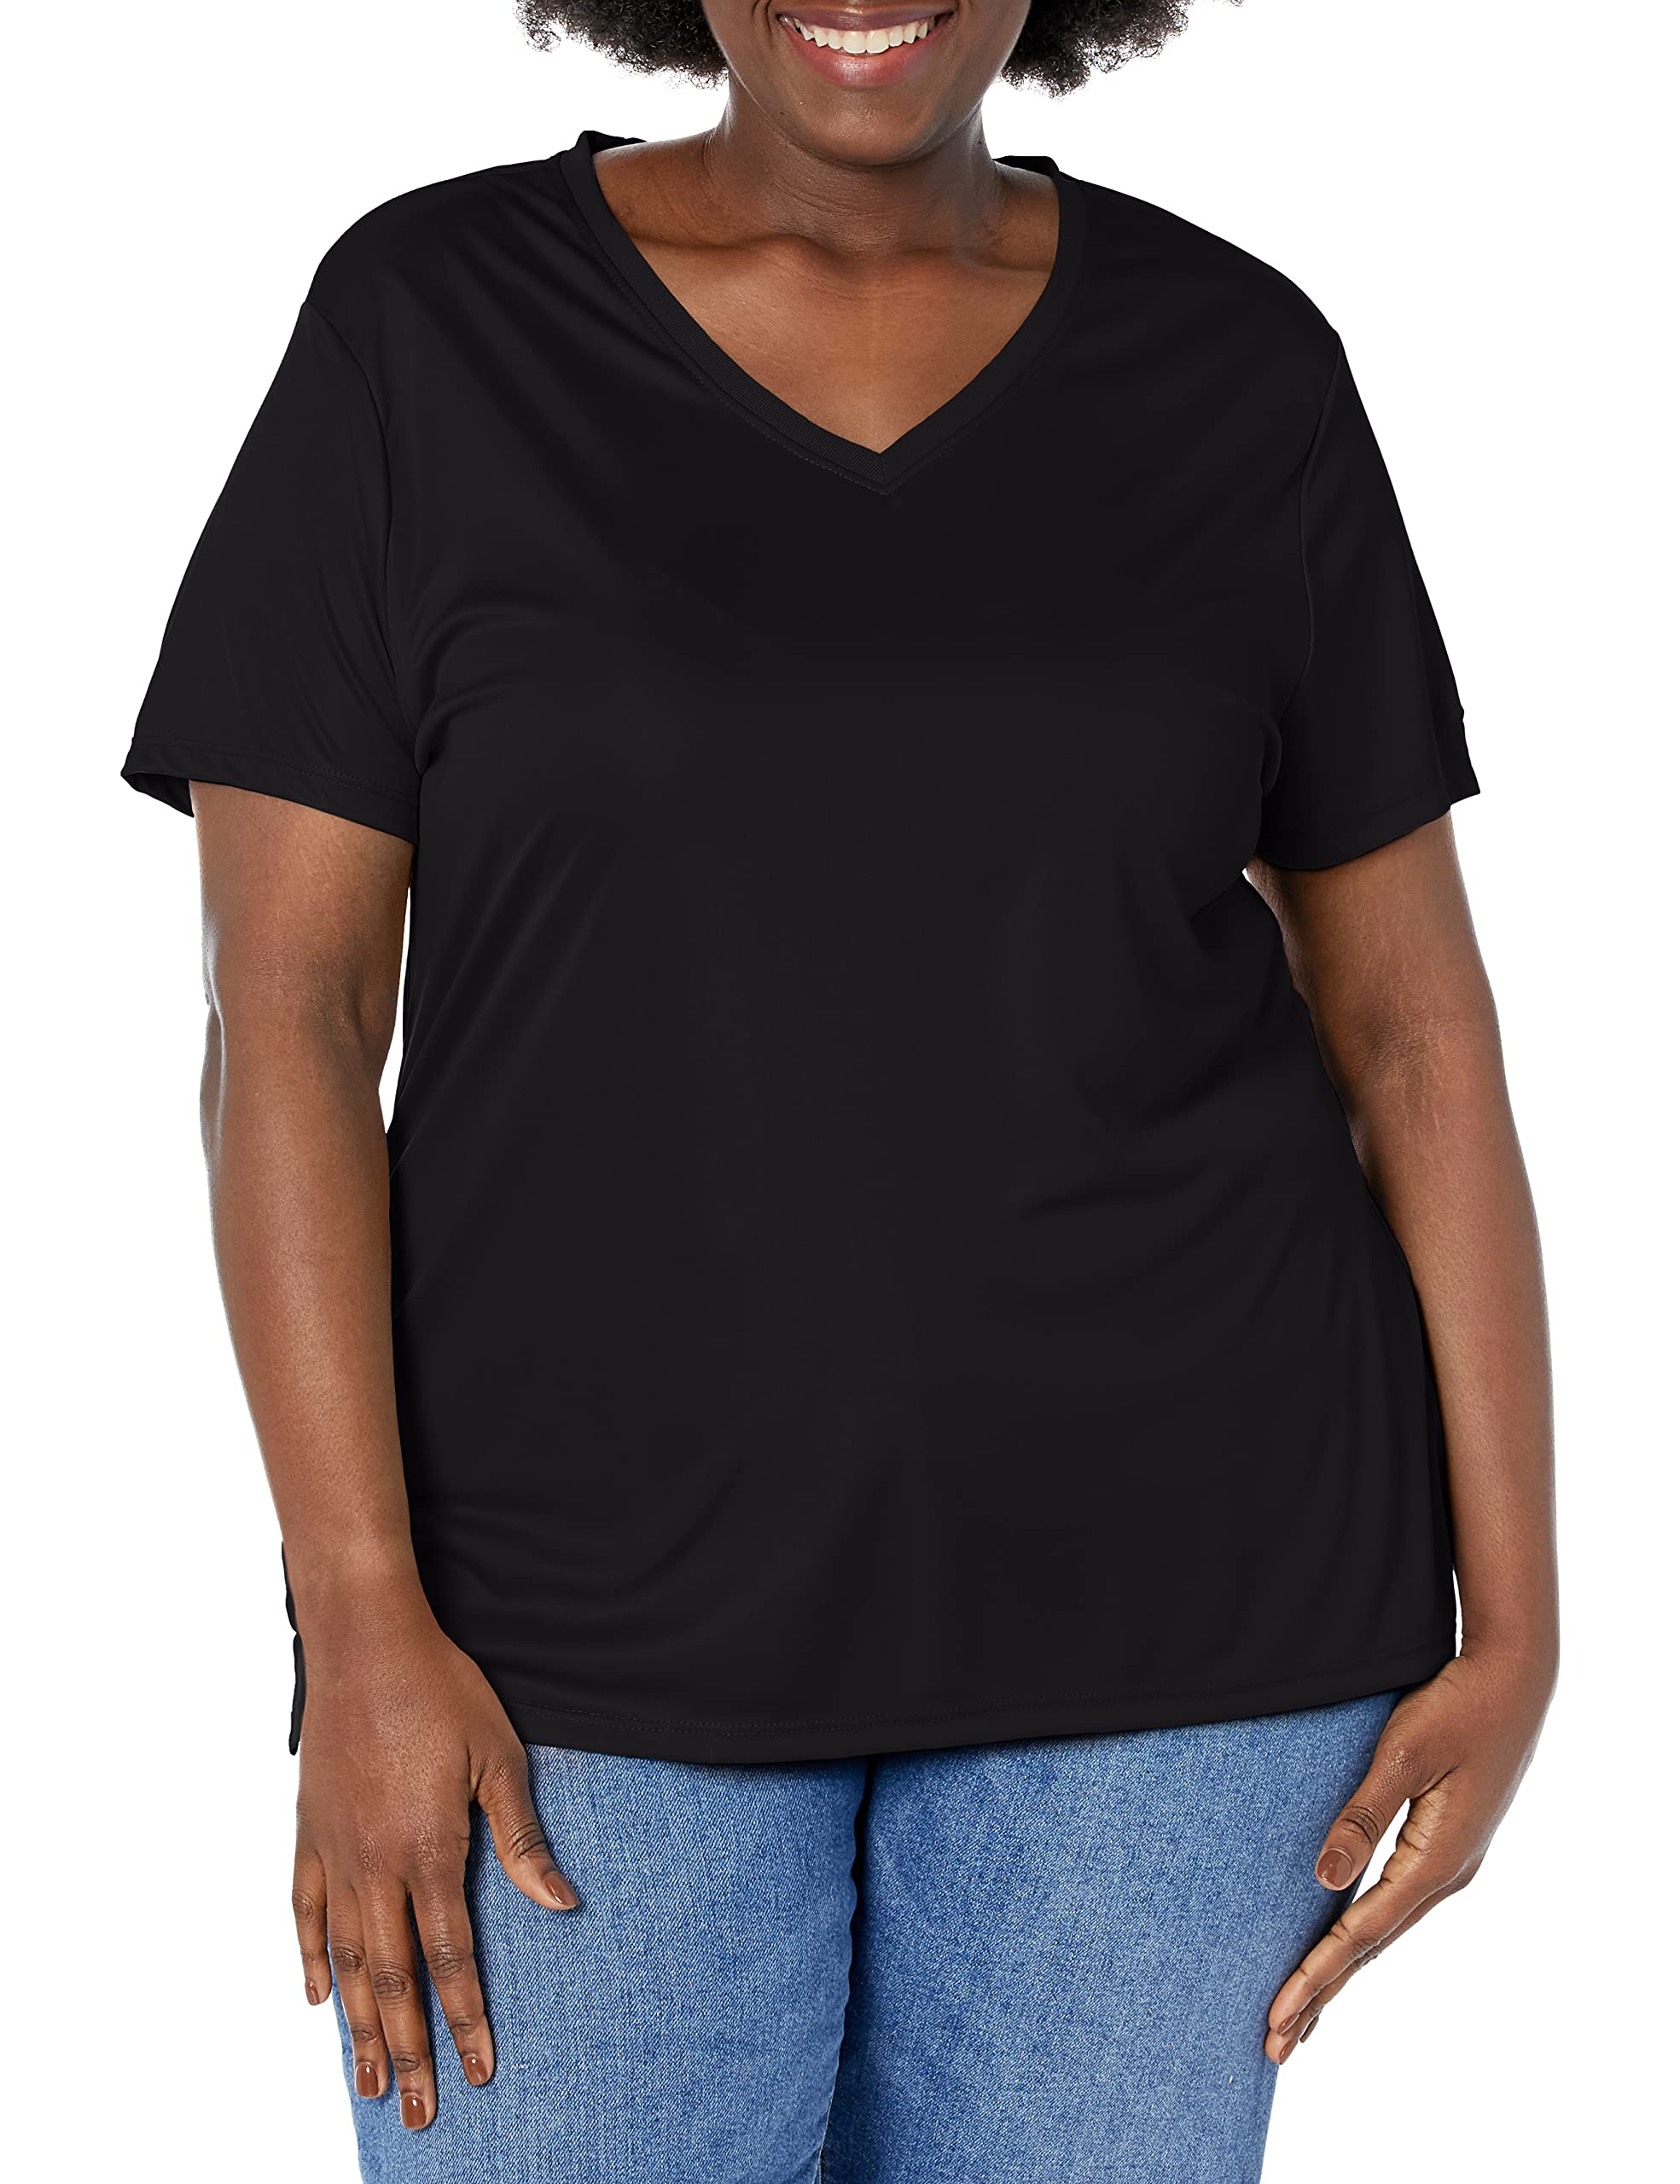 Just My Size Women's Plus-Size Cool DRI Short Sleeve V-Neck Tee